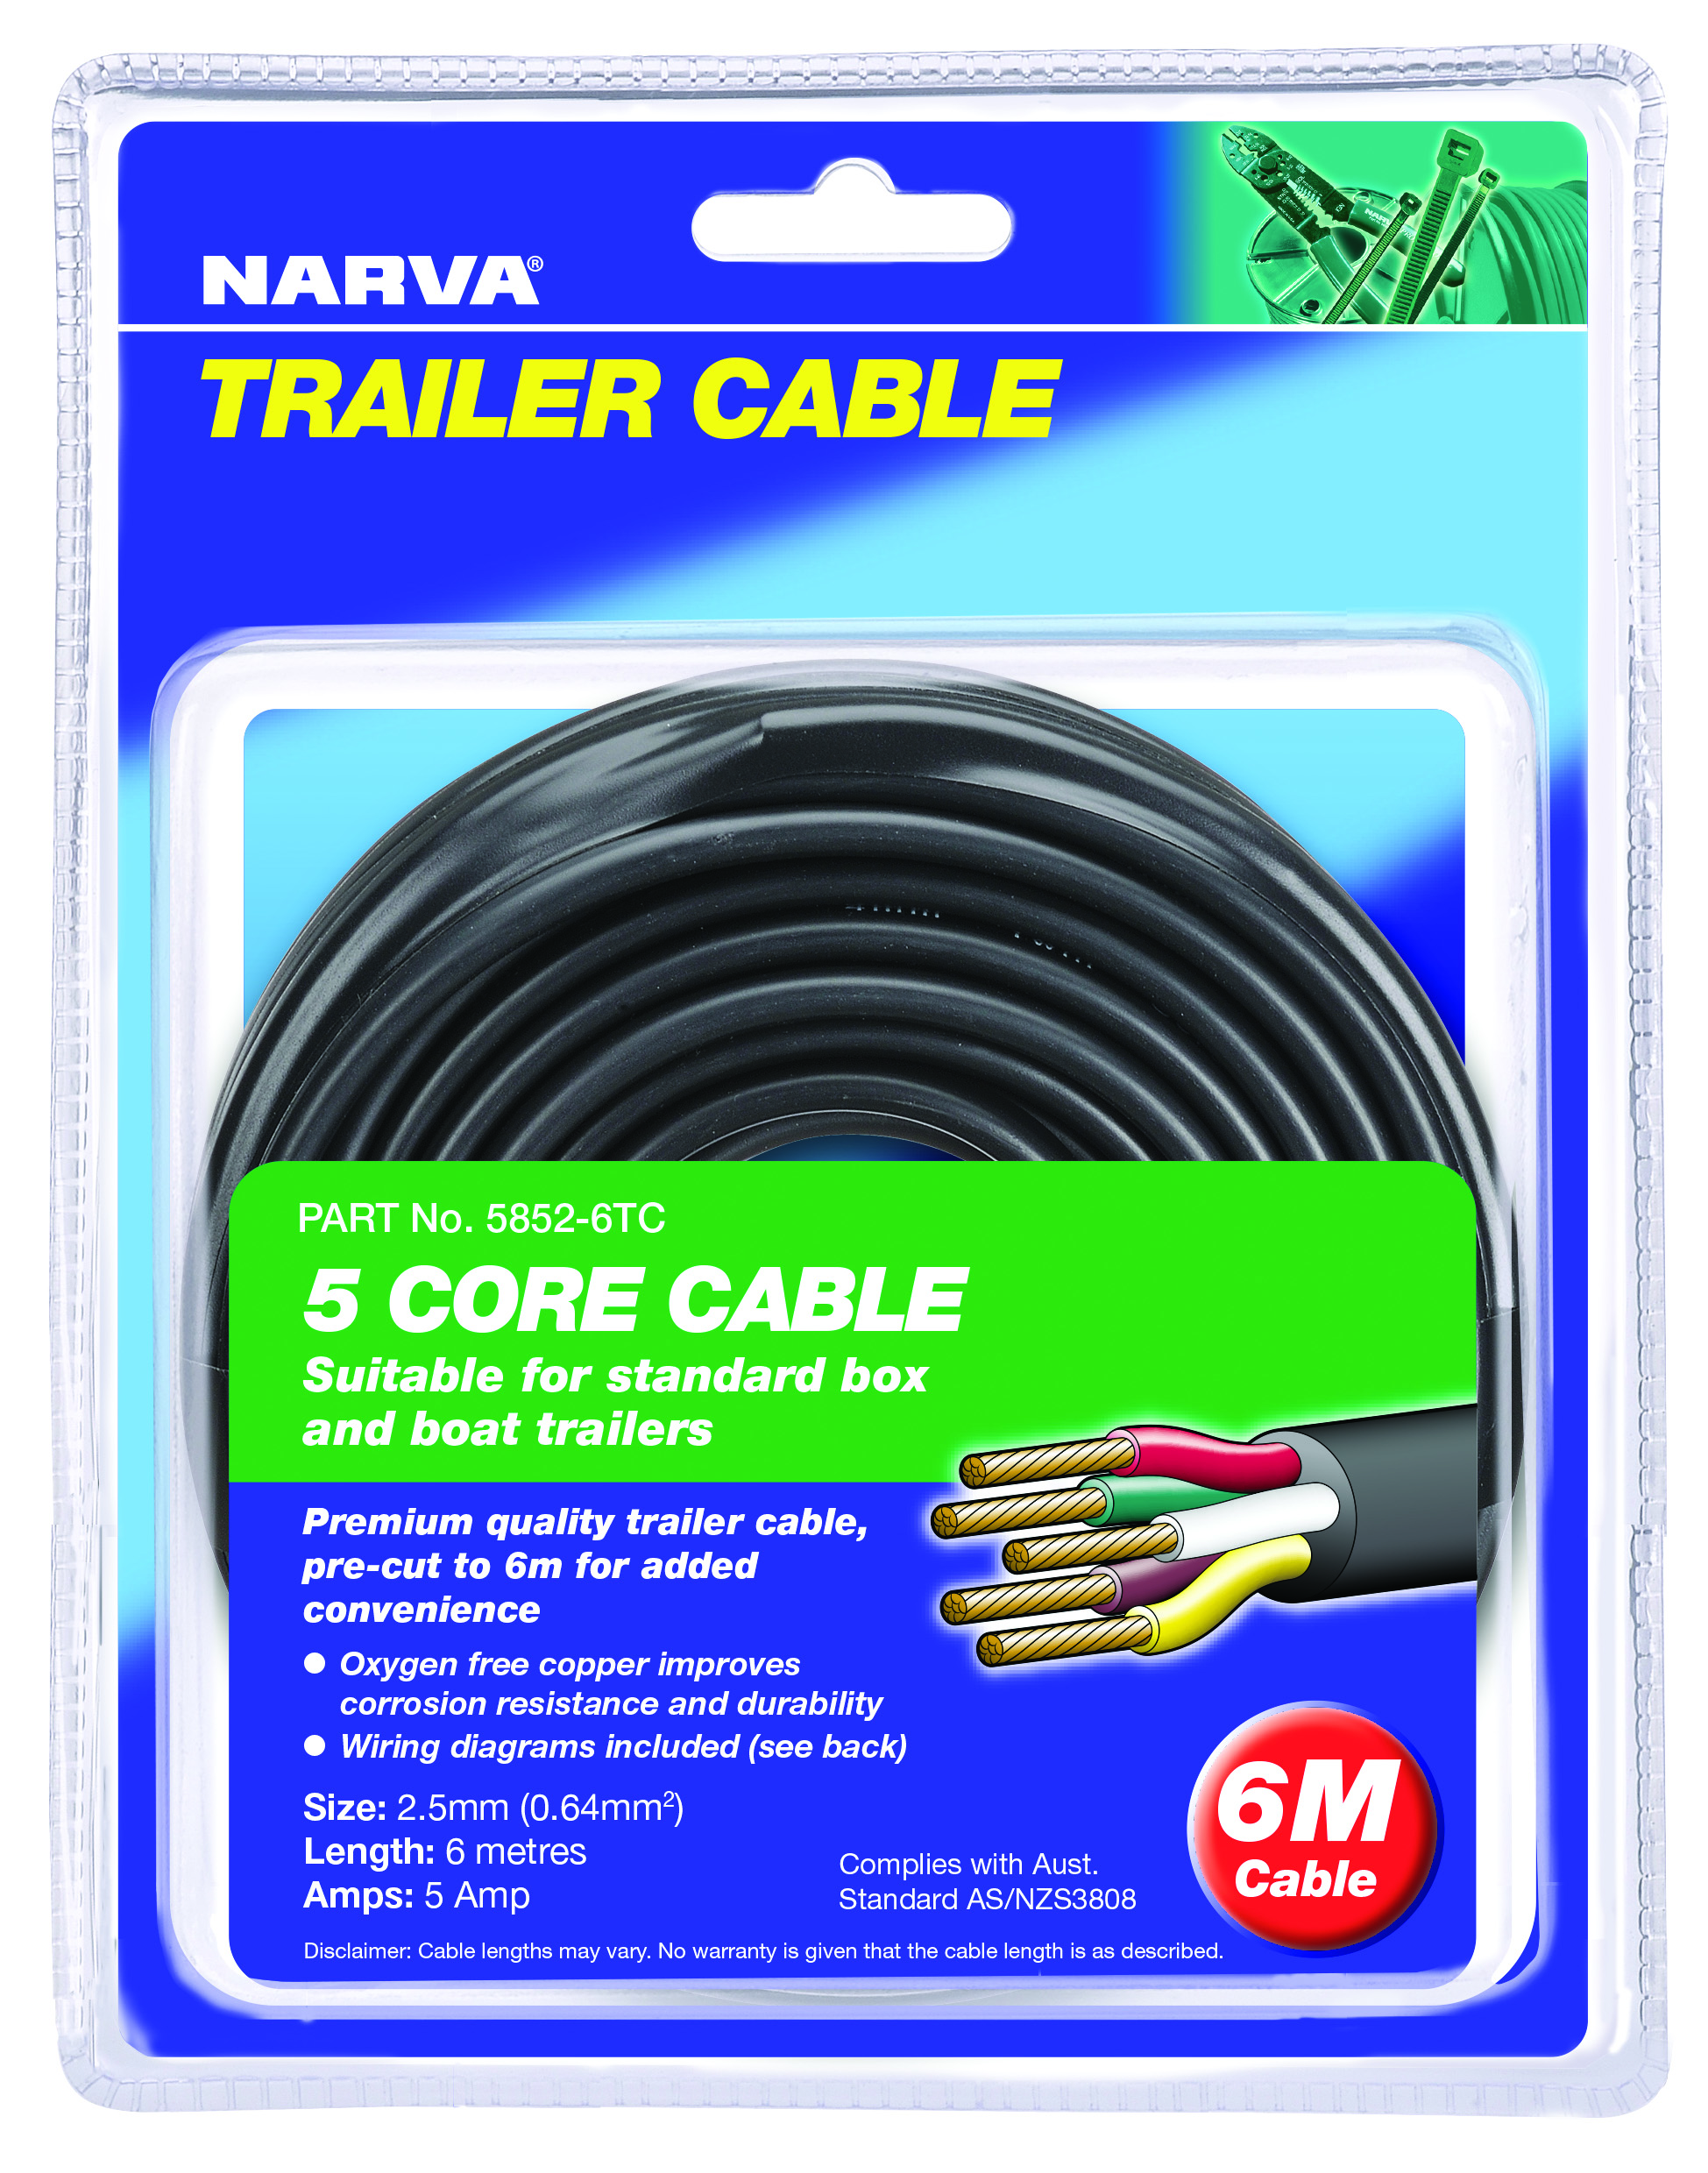 Narva 5A 2.5MM 5 CORE TRAILER CABLE (6M) Red; Green; Yellow; White